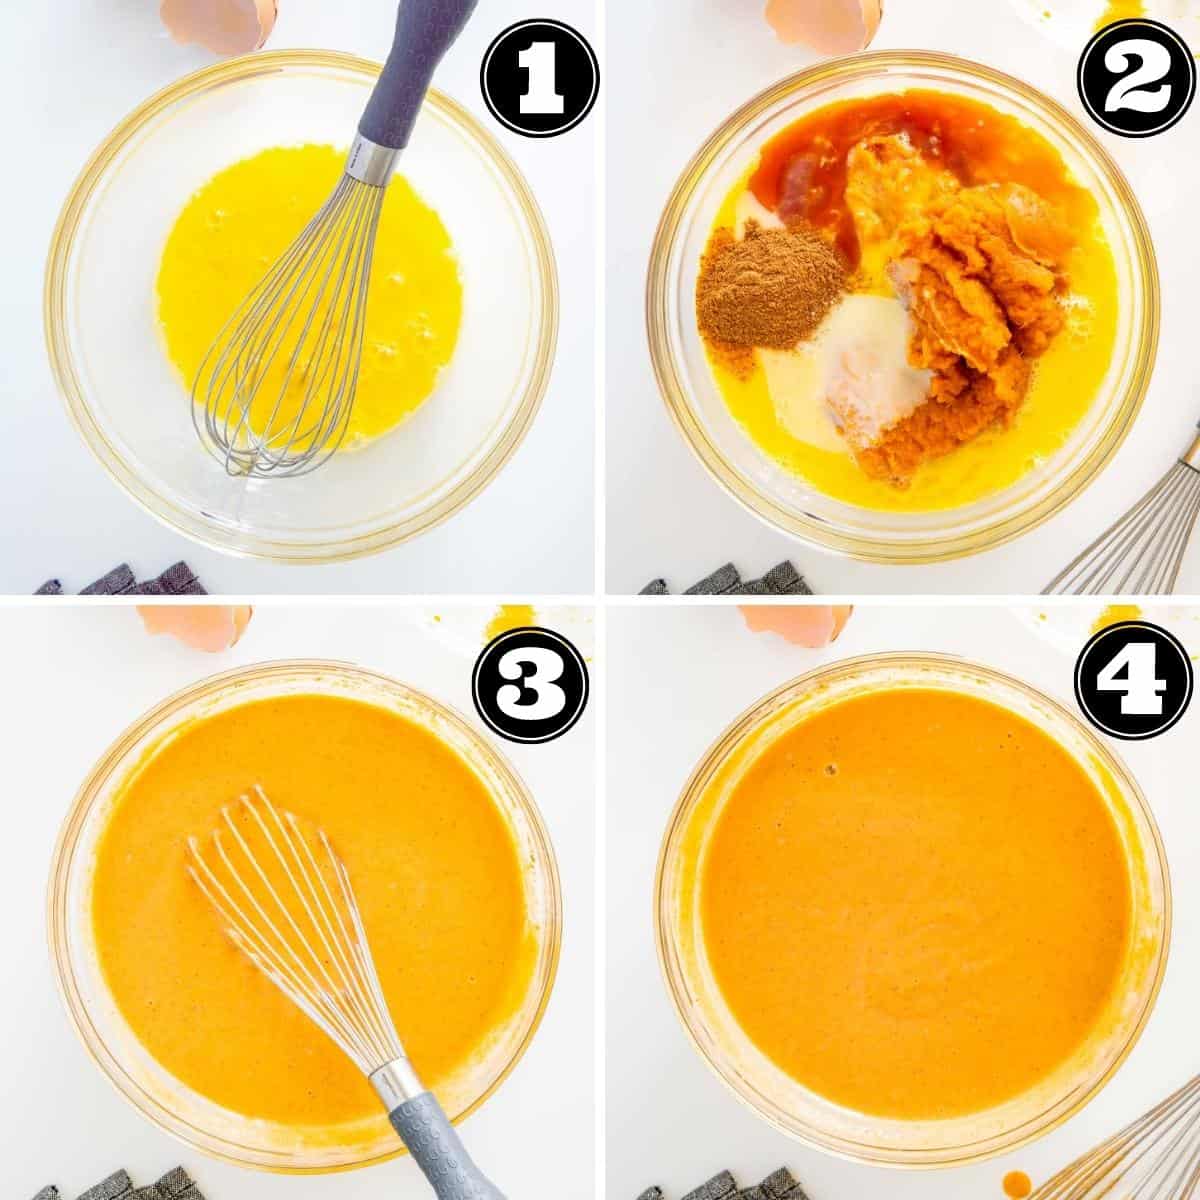 Collage image showing steps to make pumpkin pie filling mixture.